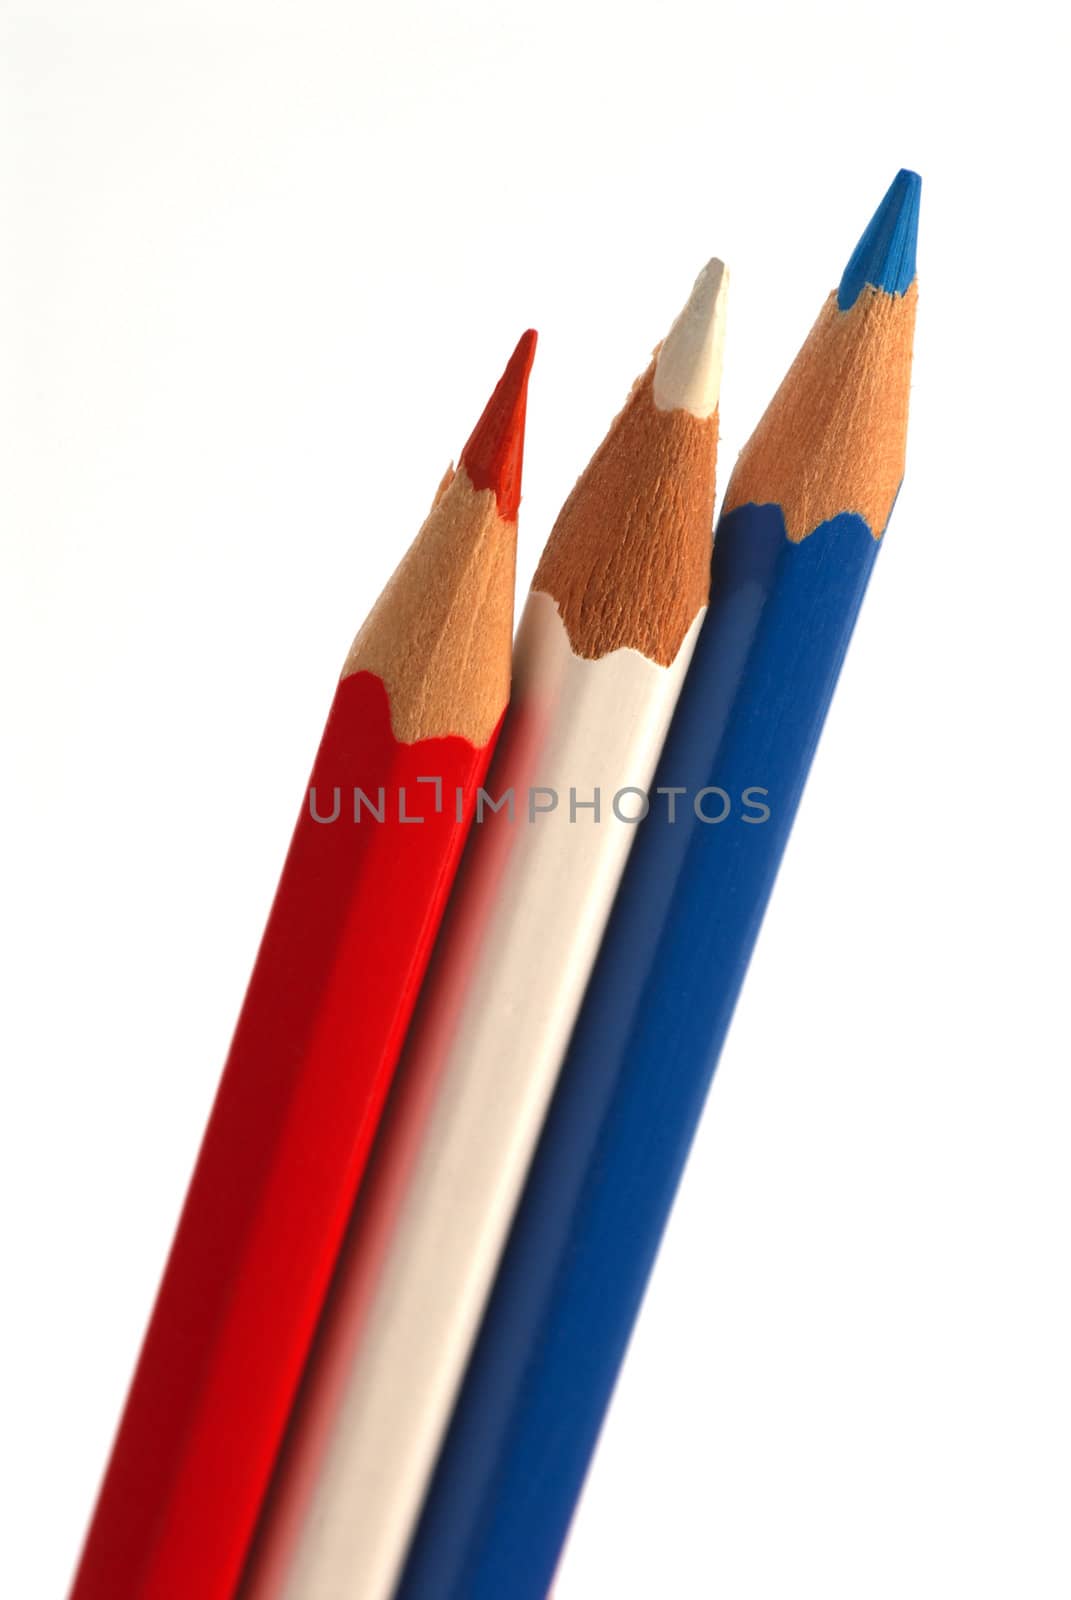 Red, blue and white pencils on white background. A close up